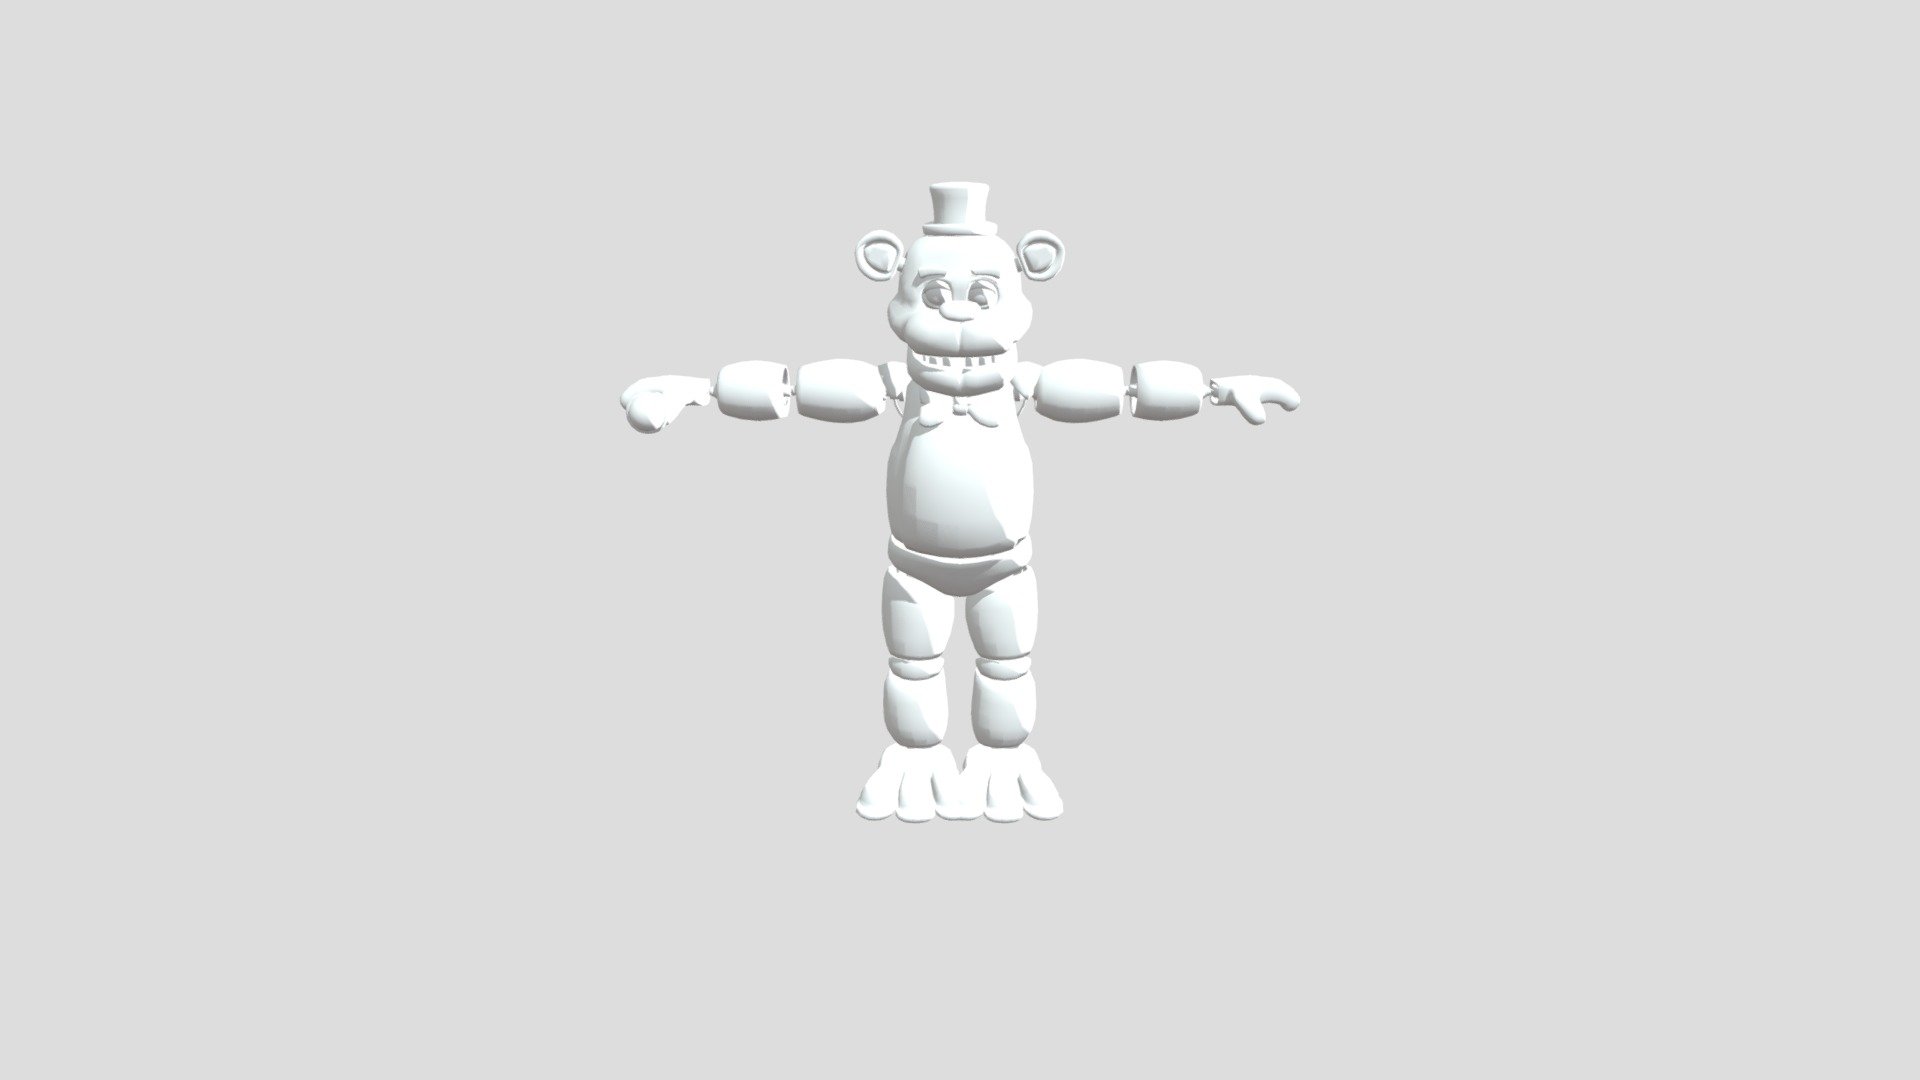 Freddy Rigged from Five Nights at Freddys VR